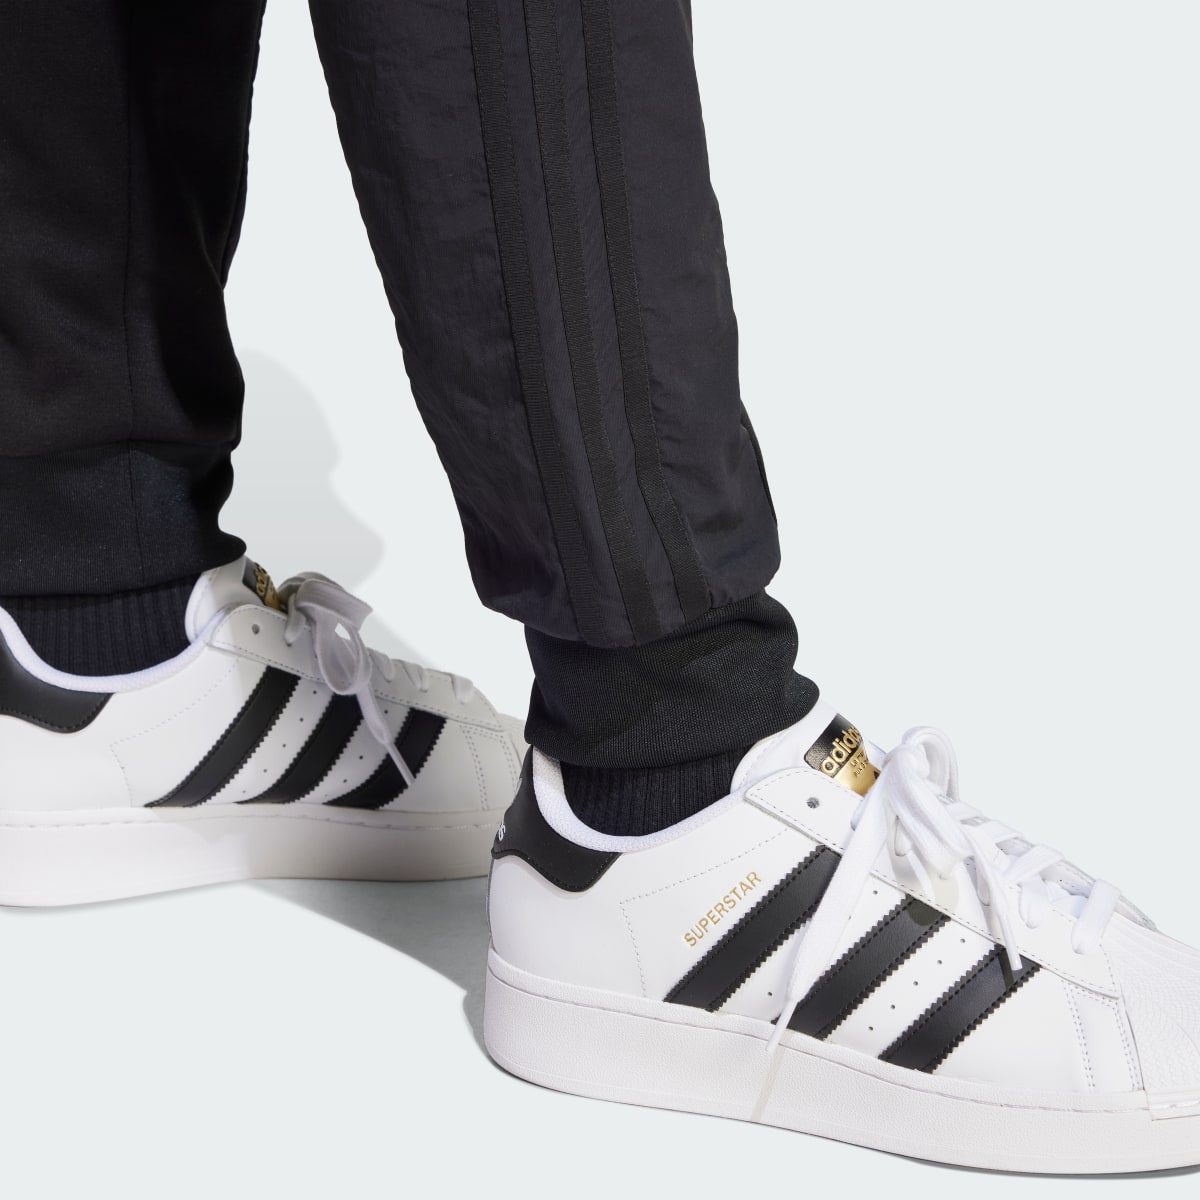 Adidas Adicolor Re-Pro SST Material Mix Tracksuit Bottoms. 6